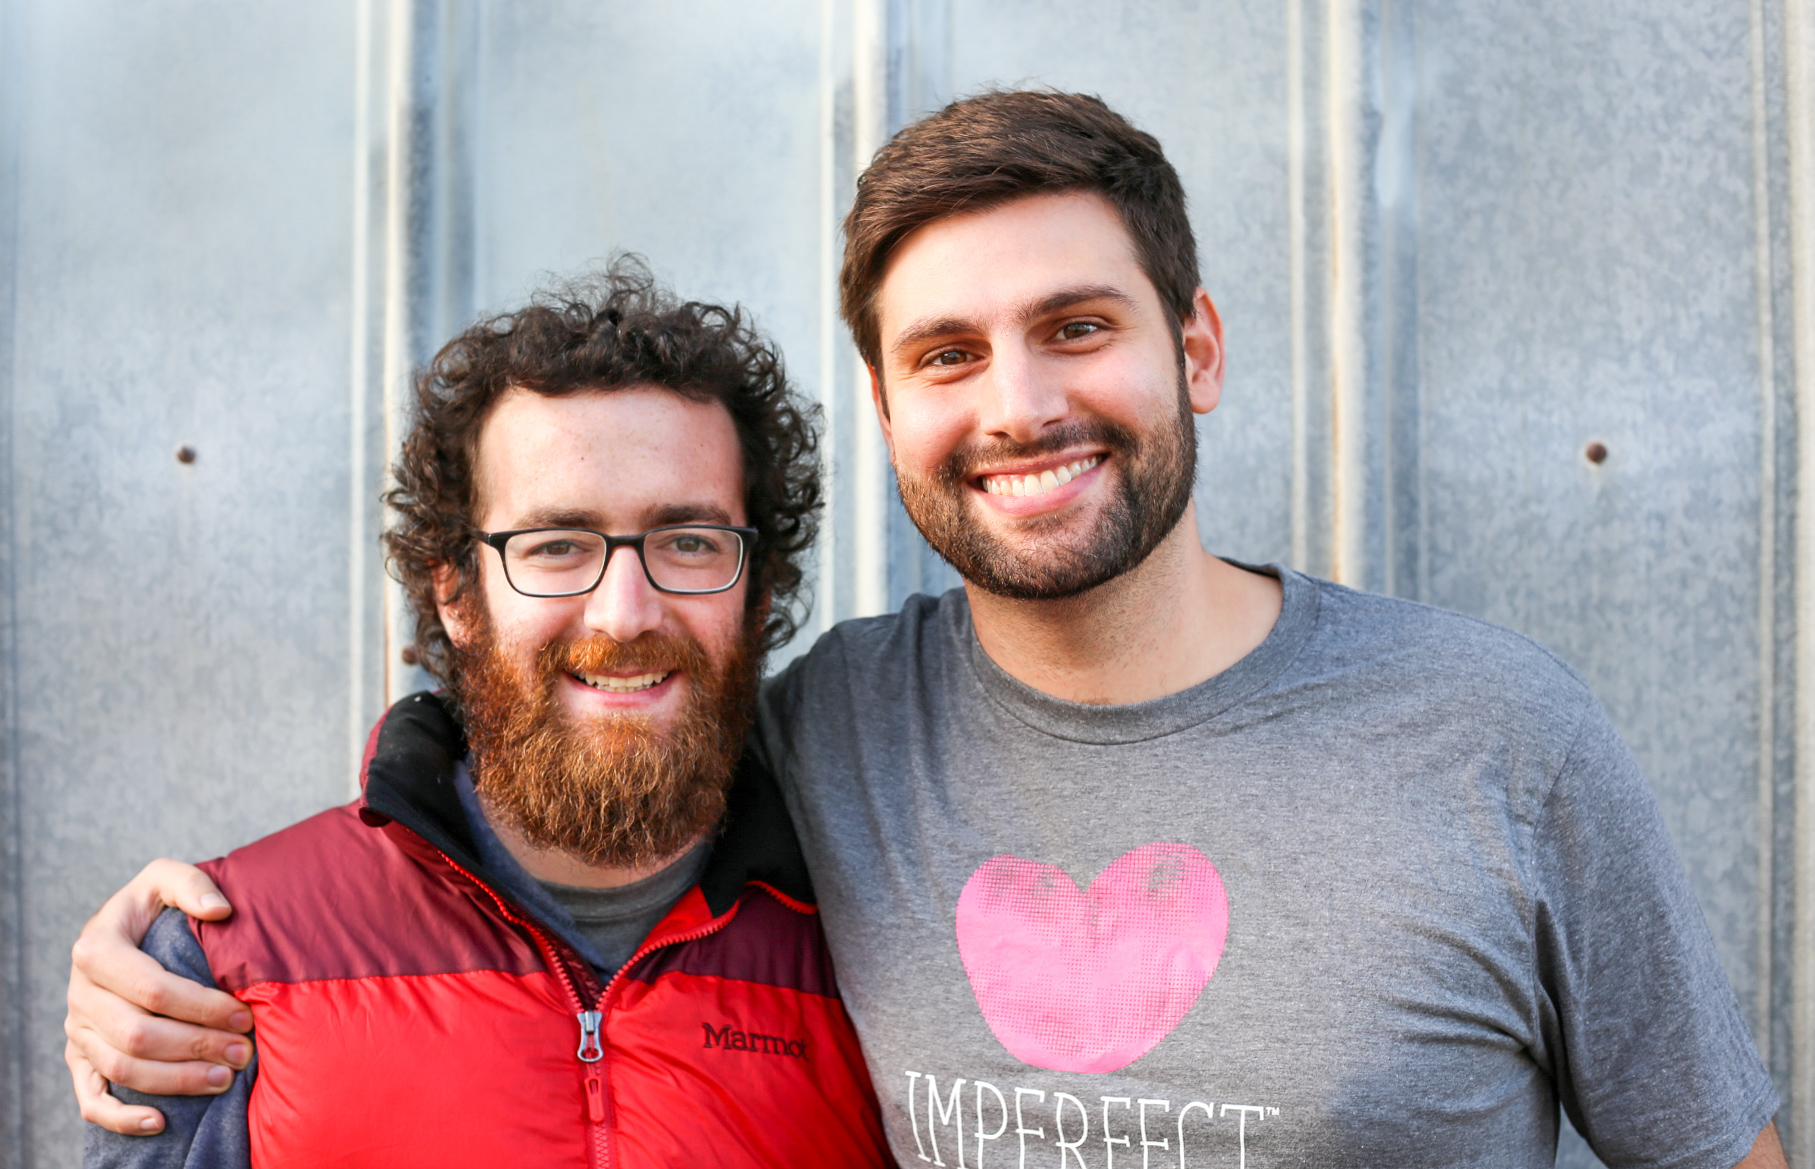 Co-founders Ben Chesler and Ben Simon are deeply grateful for you and your support of Imperfect this holiday season.